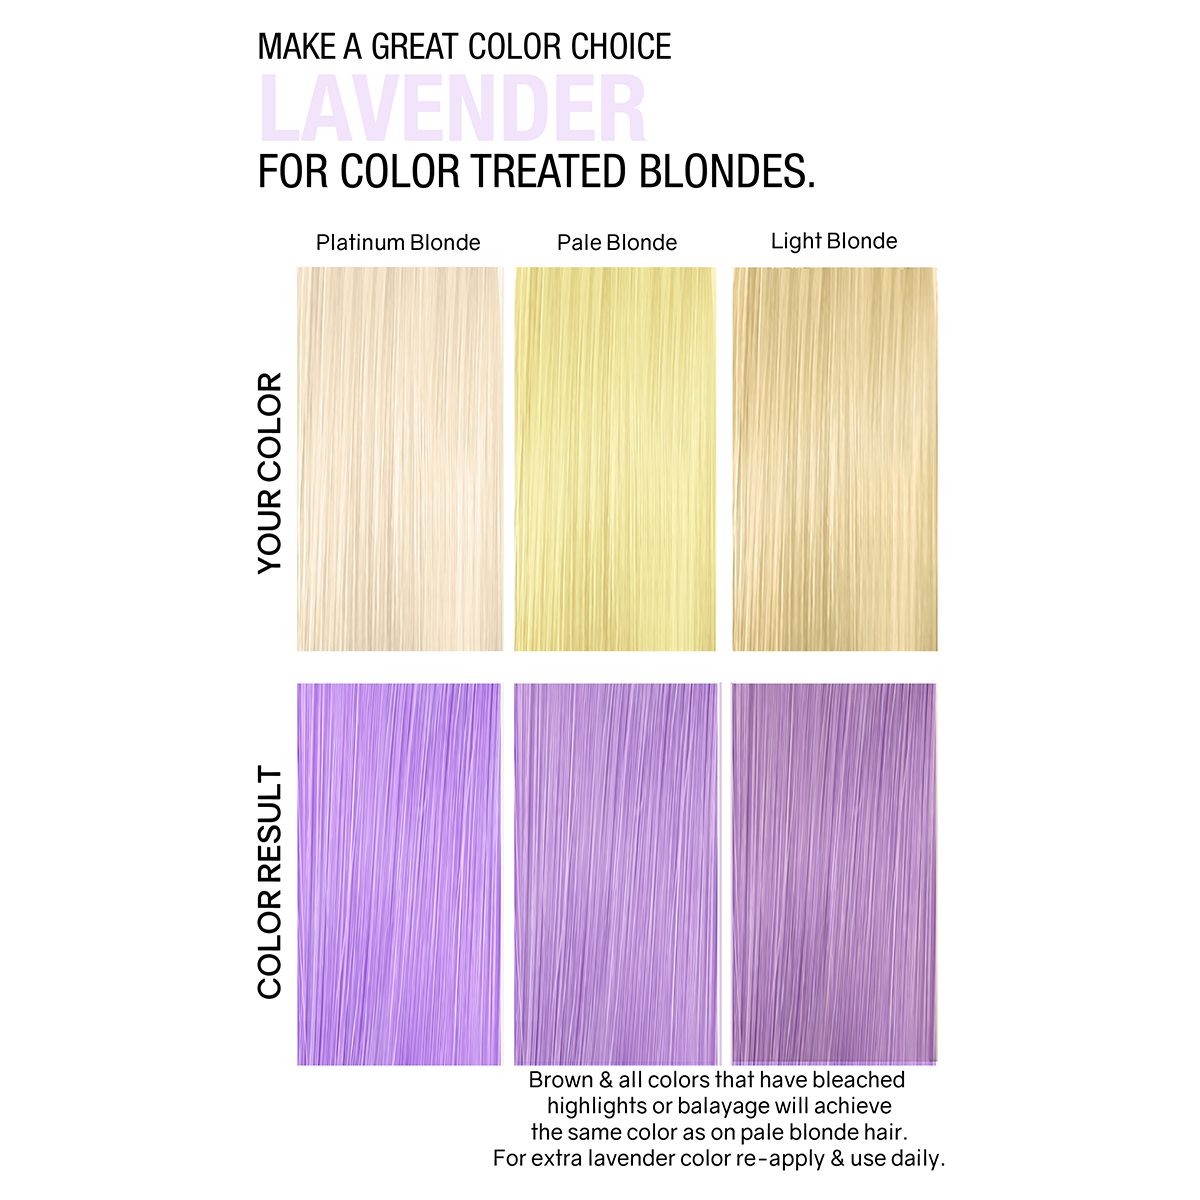 Lavender for color treated blondes.